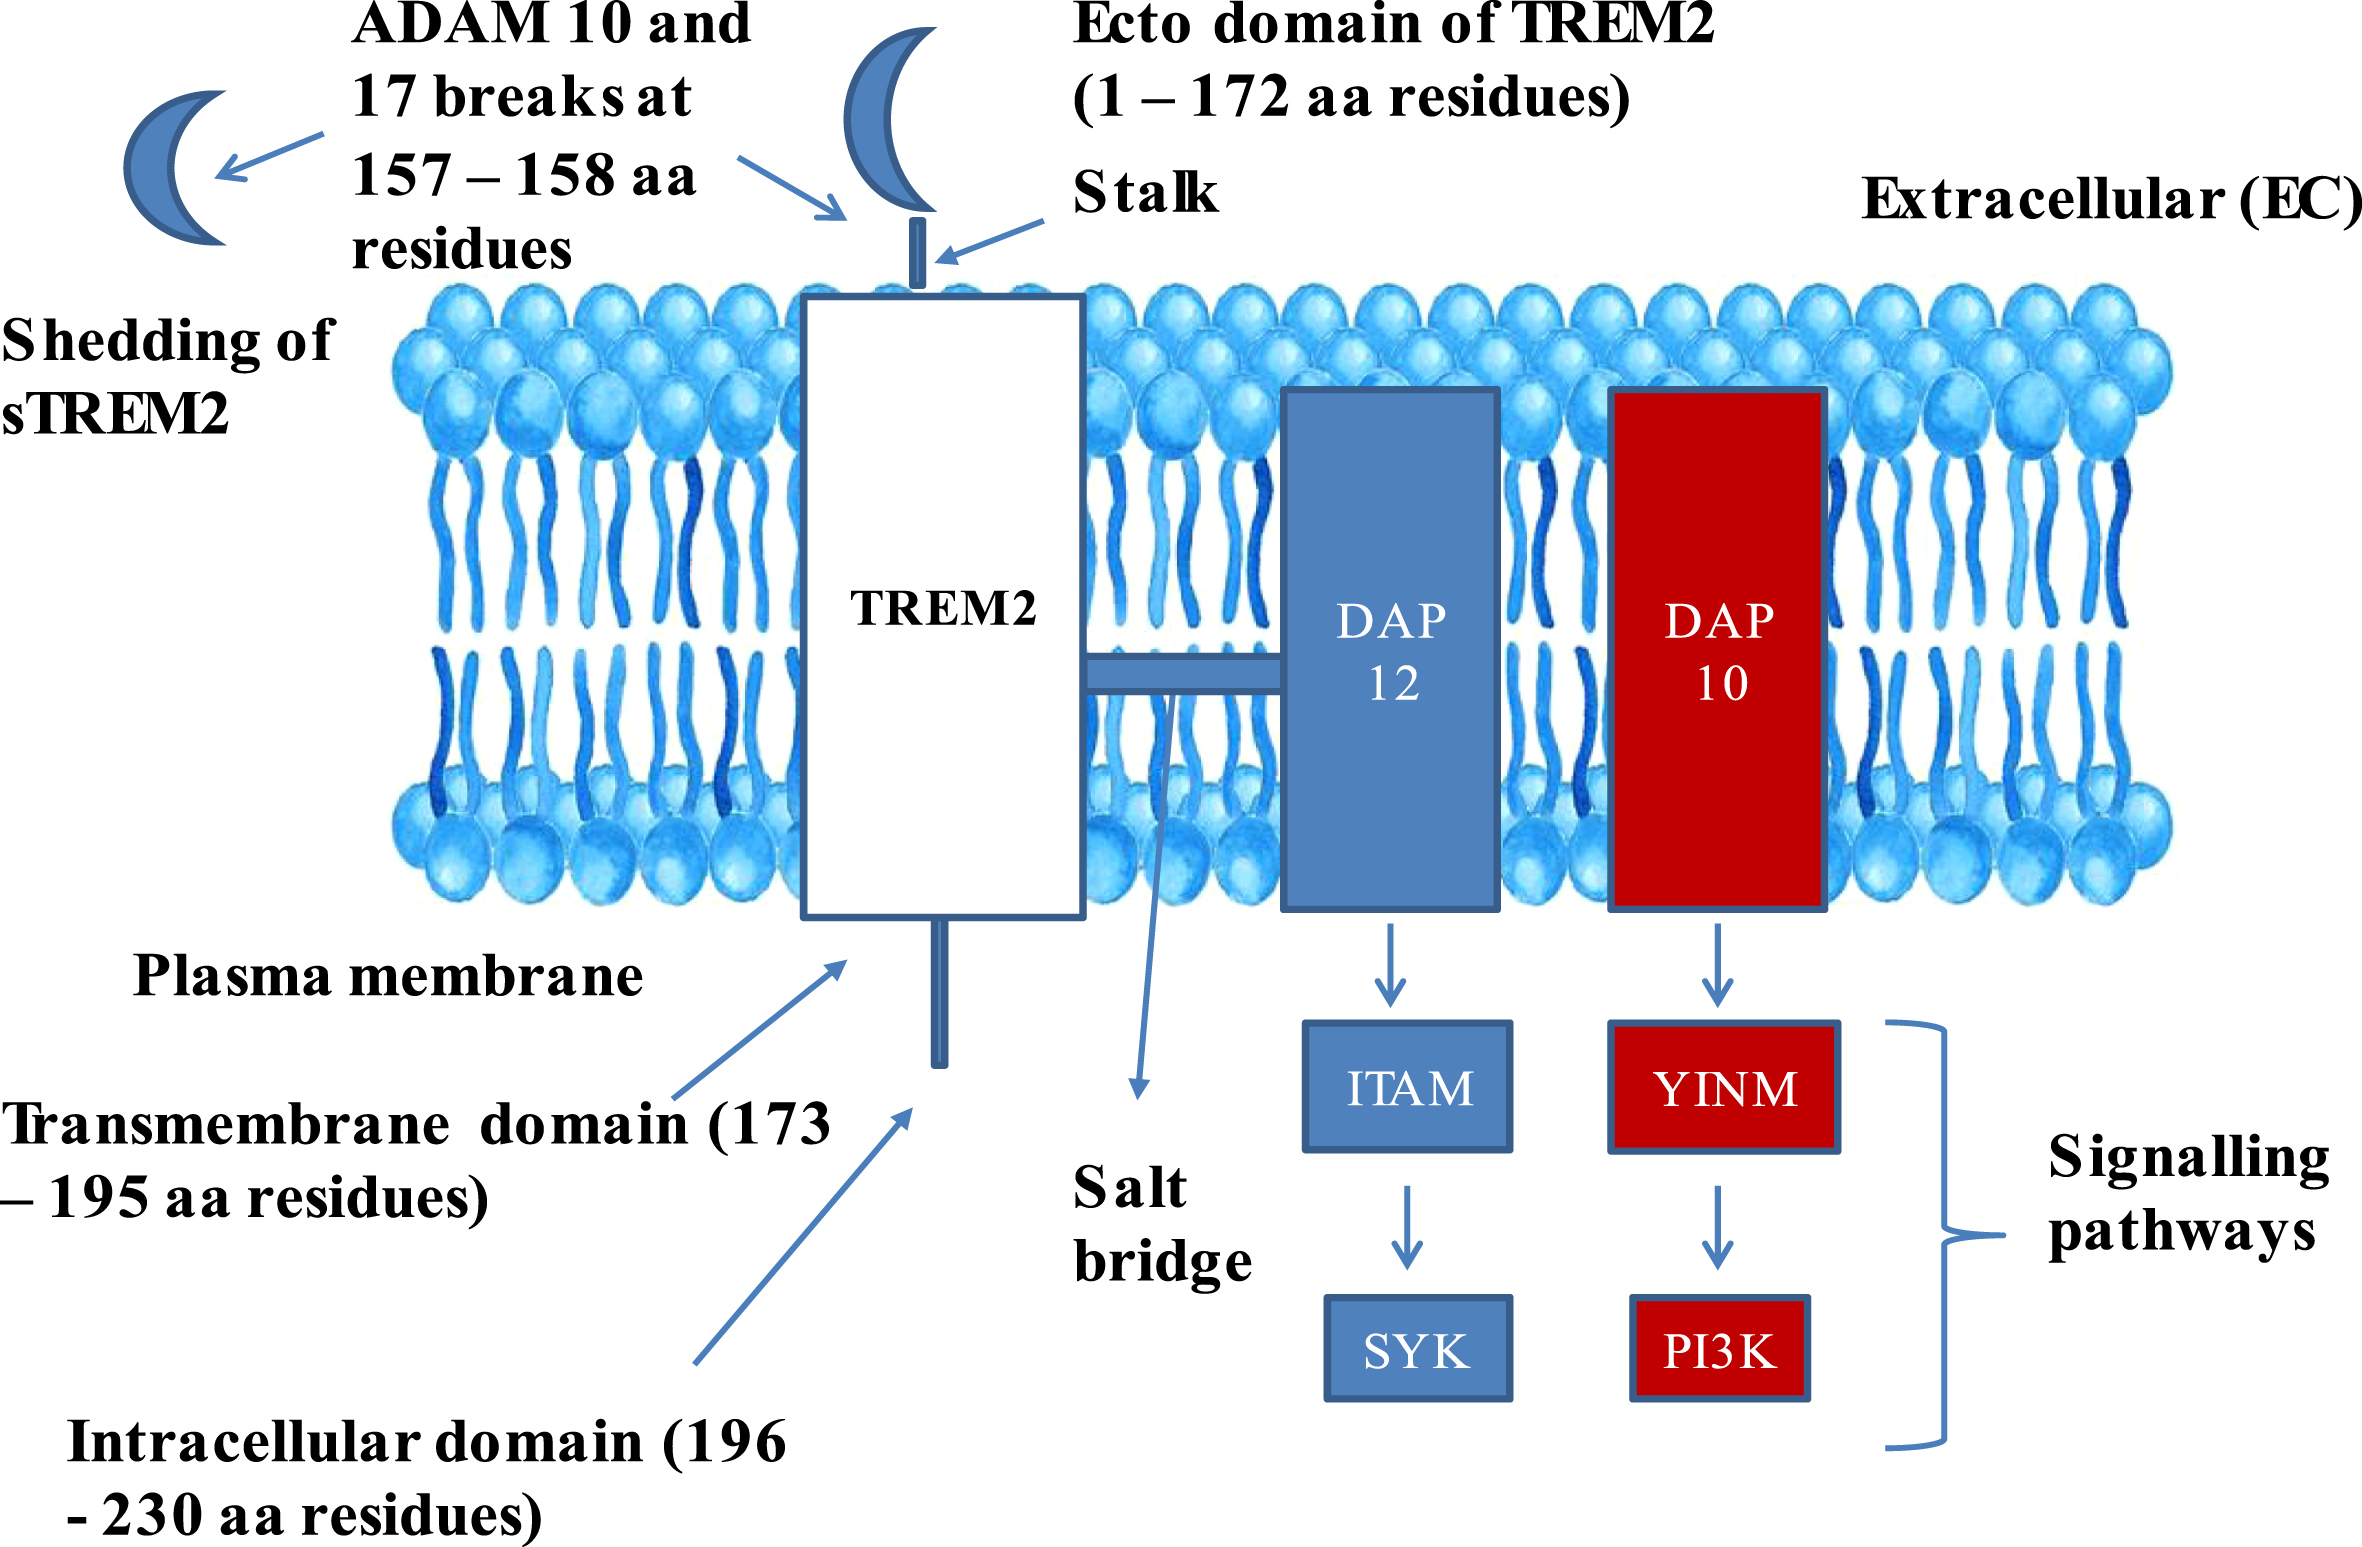 Structure of TREM2–DAP adaptor complex: The figure explains the composition of TREM2 in Plasma membrane and its complex formation with DAP 10 and 12 complex. TREM2, Triggering receptor expressed on myeloid cells 2; DAP 12 and 10, DNAX activation proteins 12 and 10; ITAM, Immunoreceptor tyrosine based activation motif; YINM, tyrosine-isoleucine-asparagine-methionine; SYK, Spleen tyrosine kinase; PI3K, Phosphatidyl inositol 3-kinase; sTREM2, Soluble TREM2; ADAM 10 and 17, α-secretase-disintegrin and metalloproteinase domain containing proteins 10 and 17.